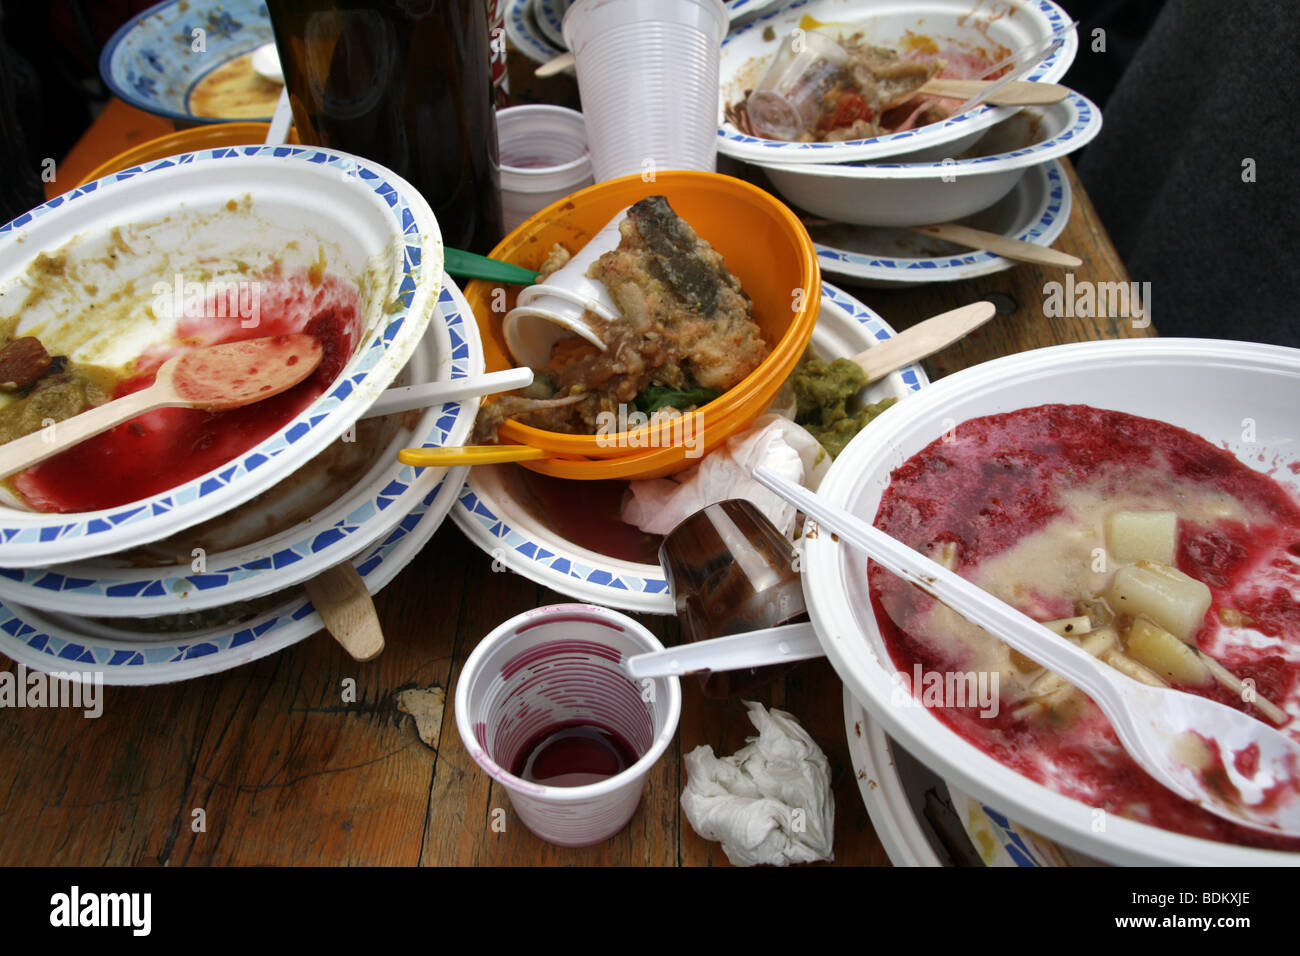 pile of food dishes on wooden table outdoors Stock Photo